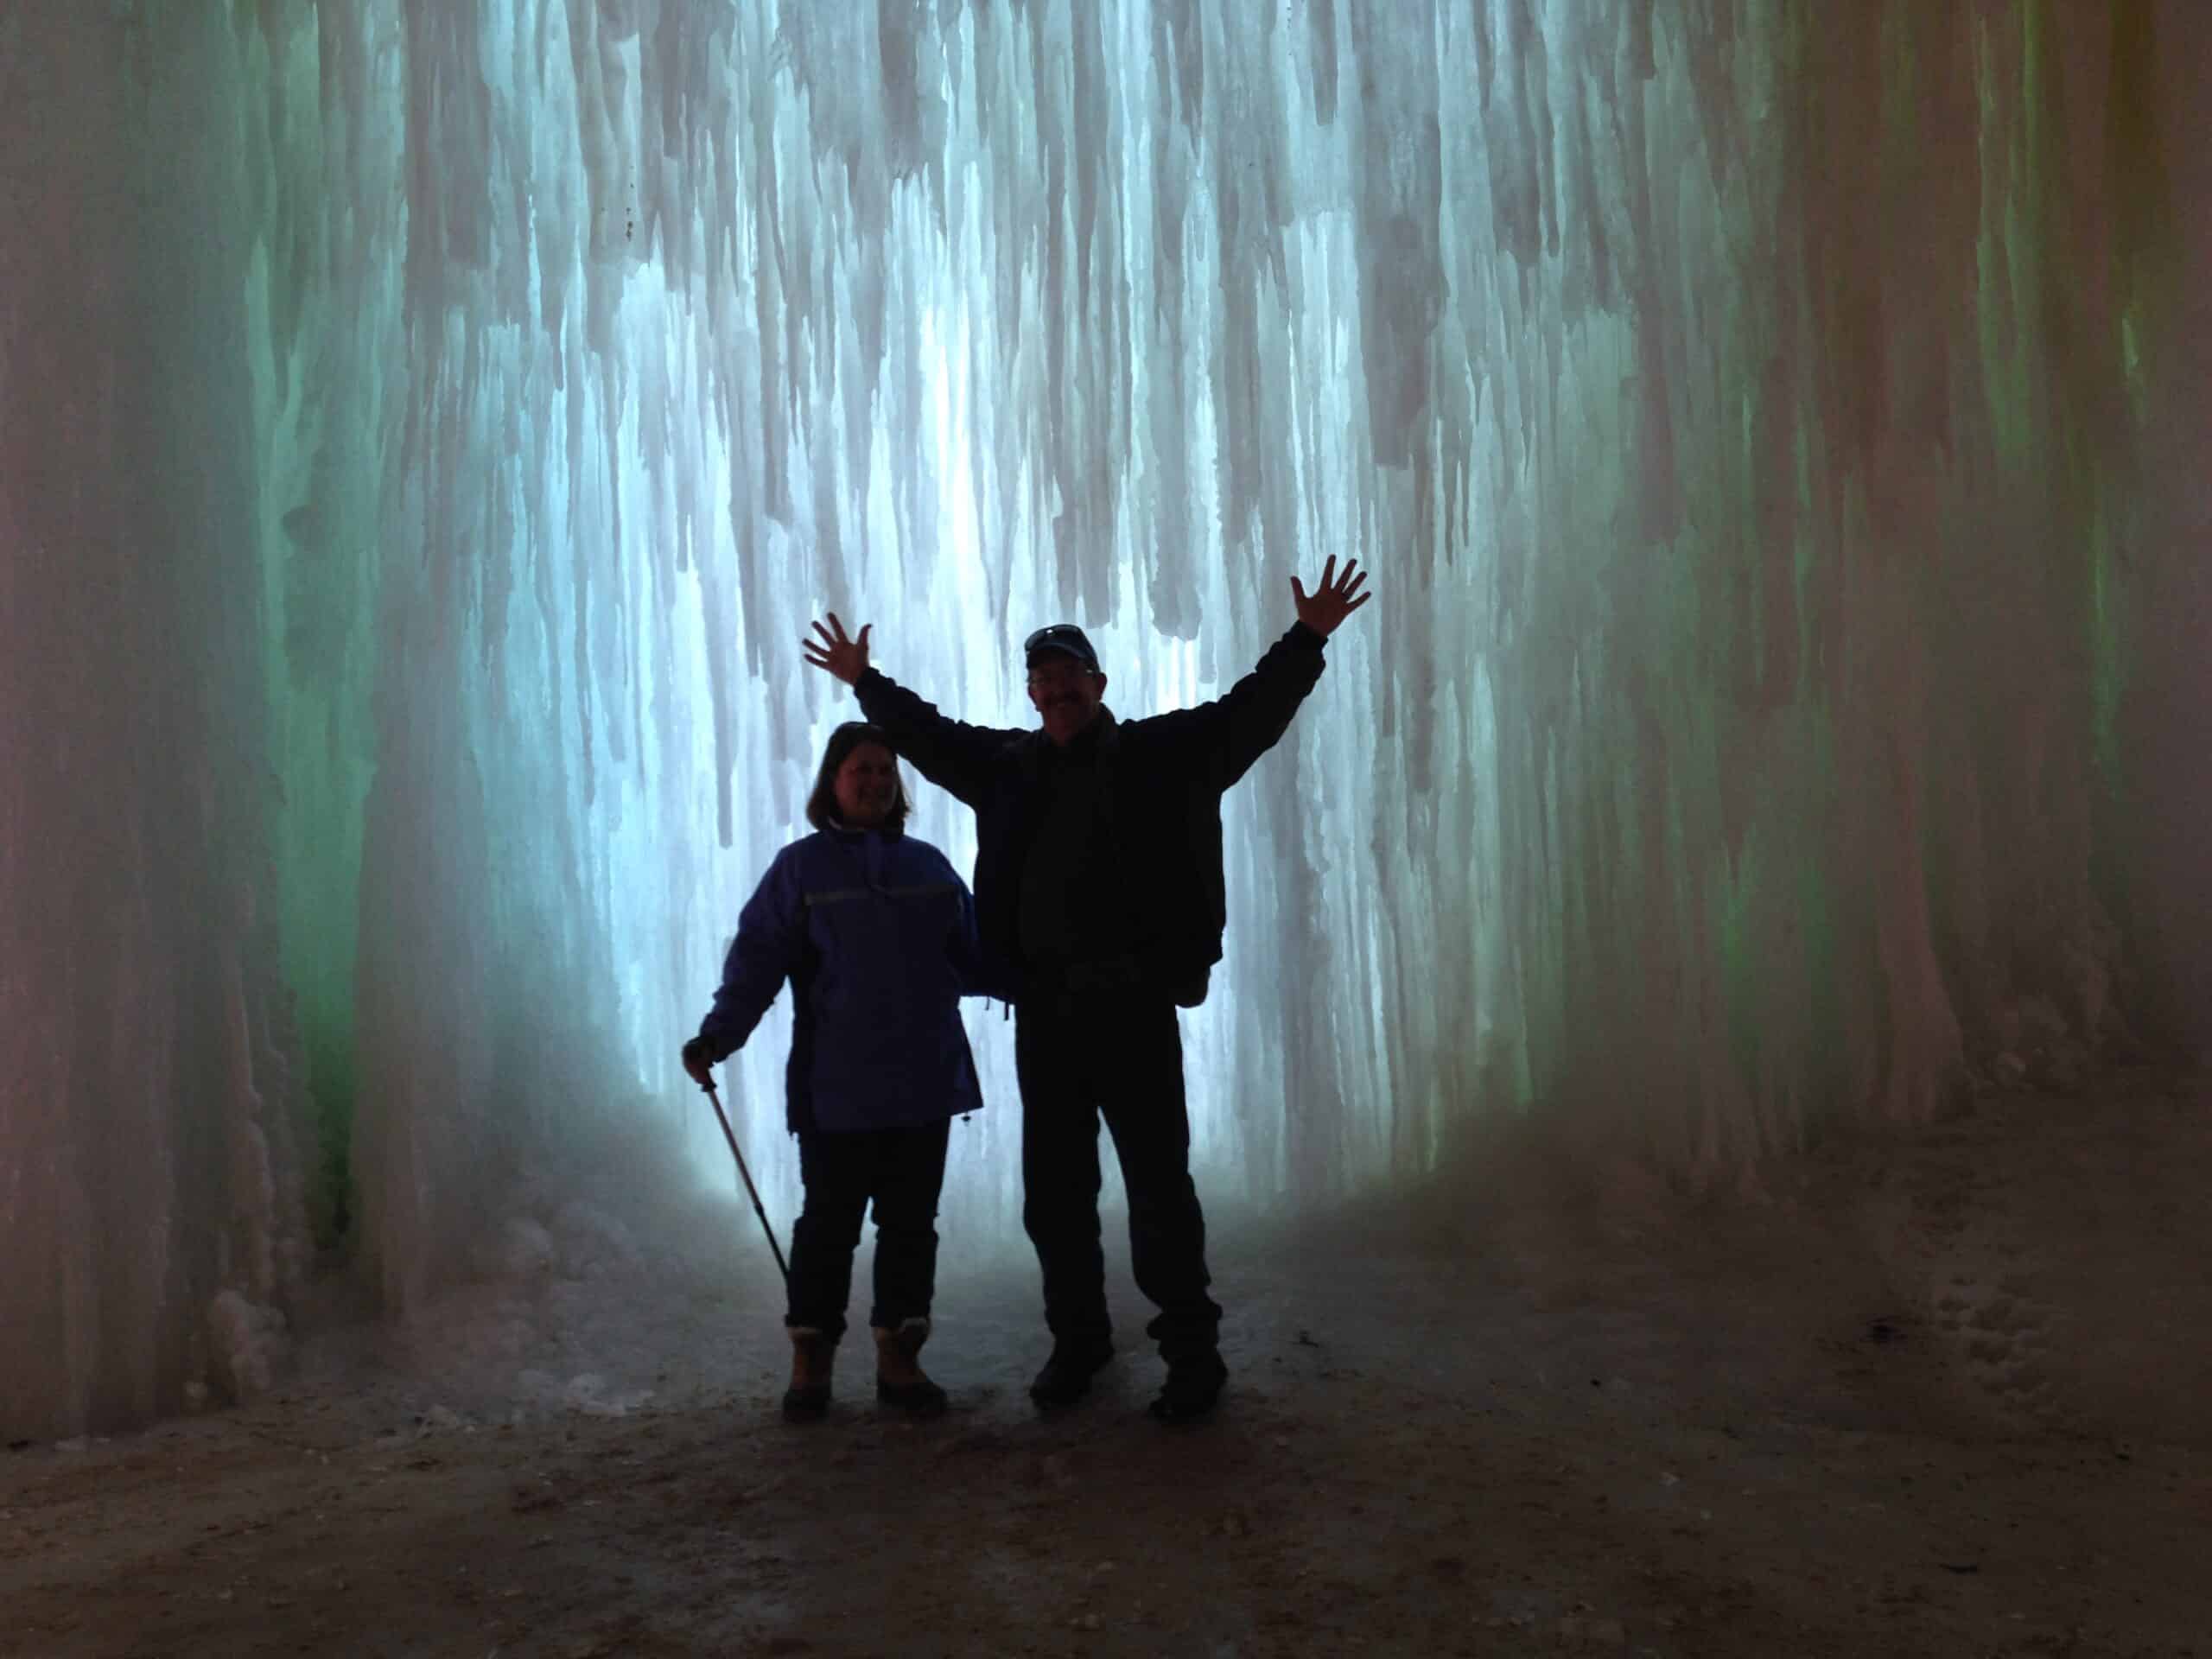 2 people behind a wall of ice with light shining through while winter hiking